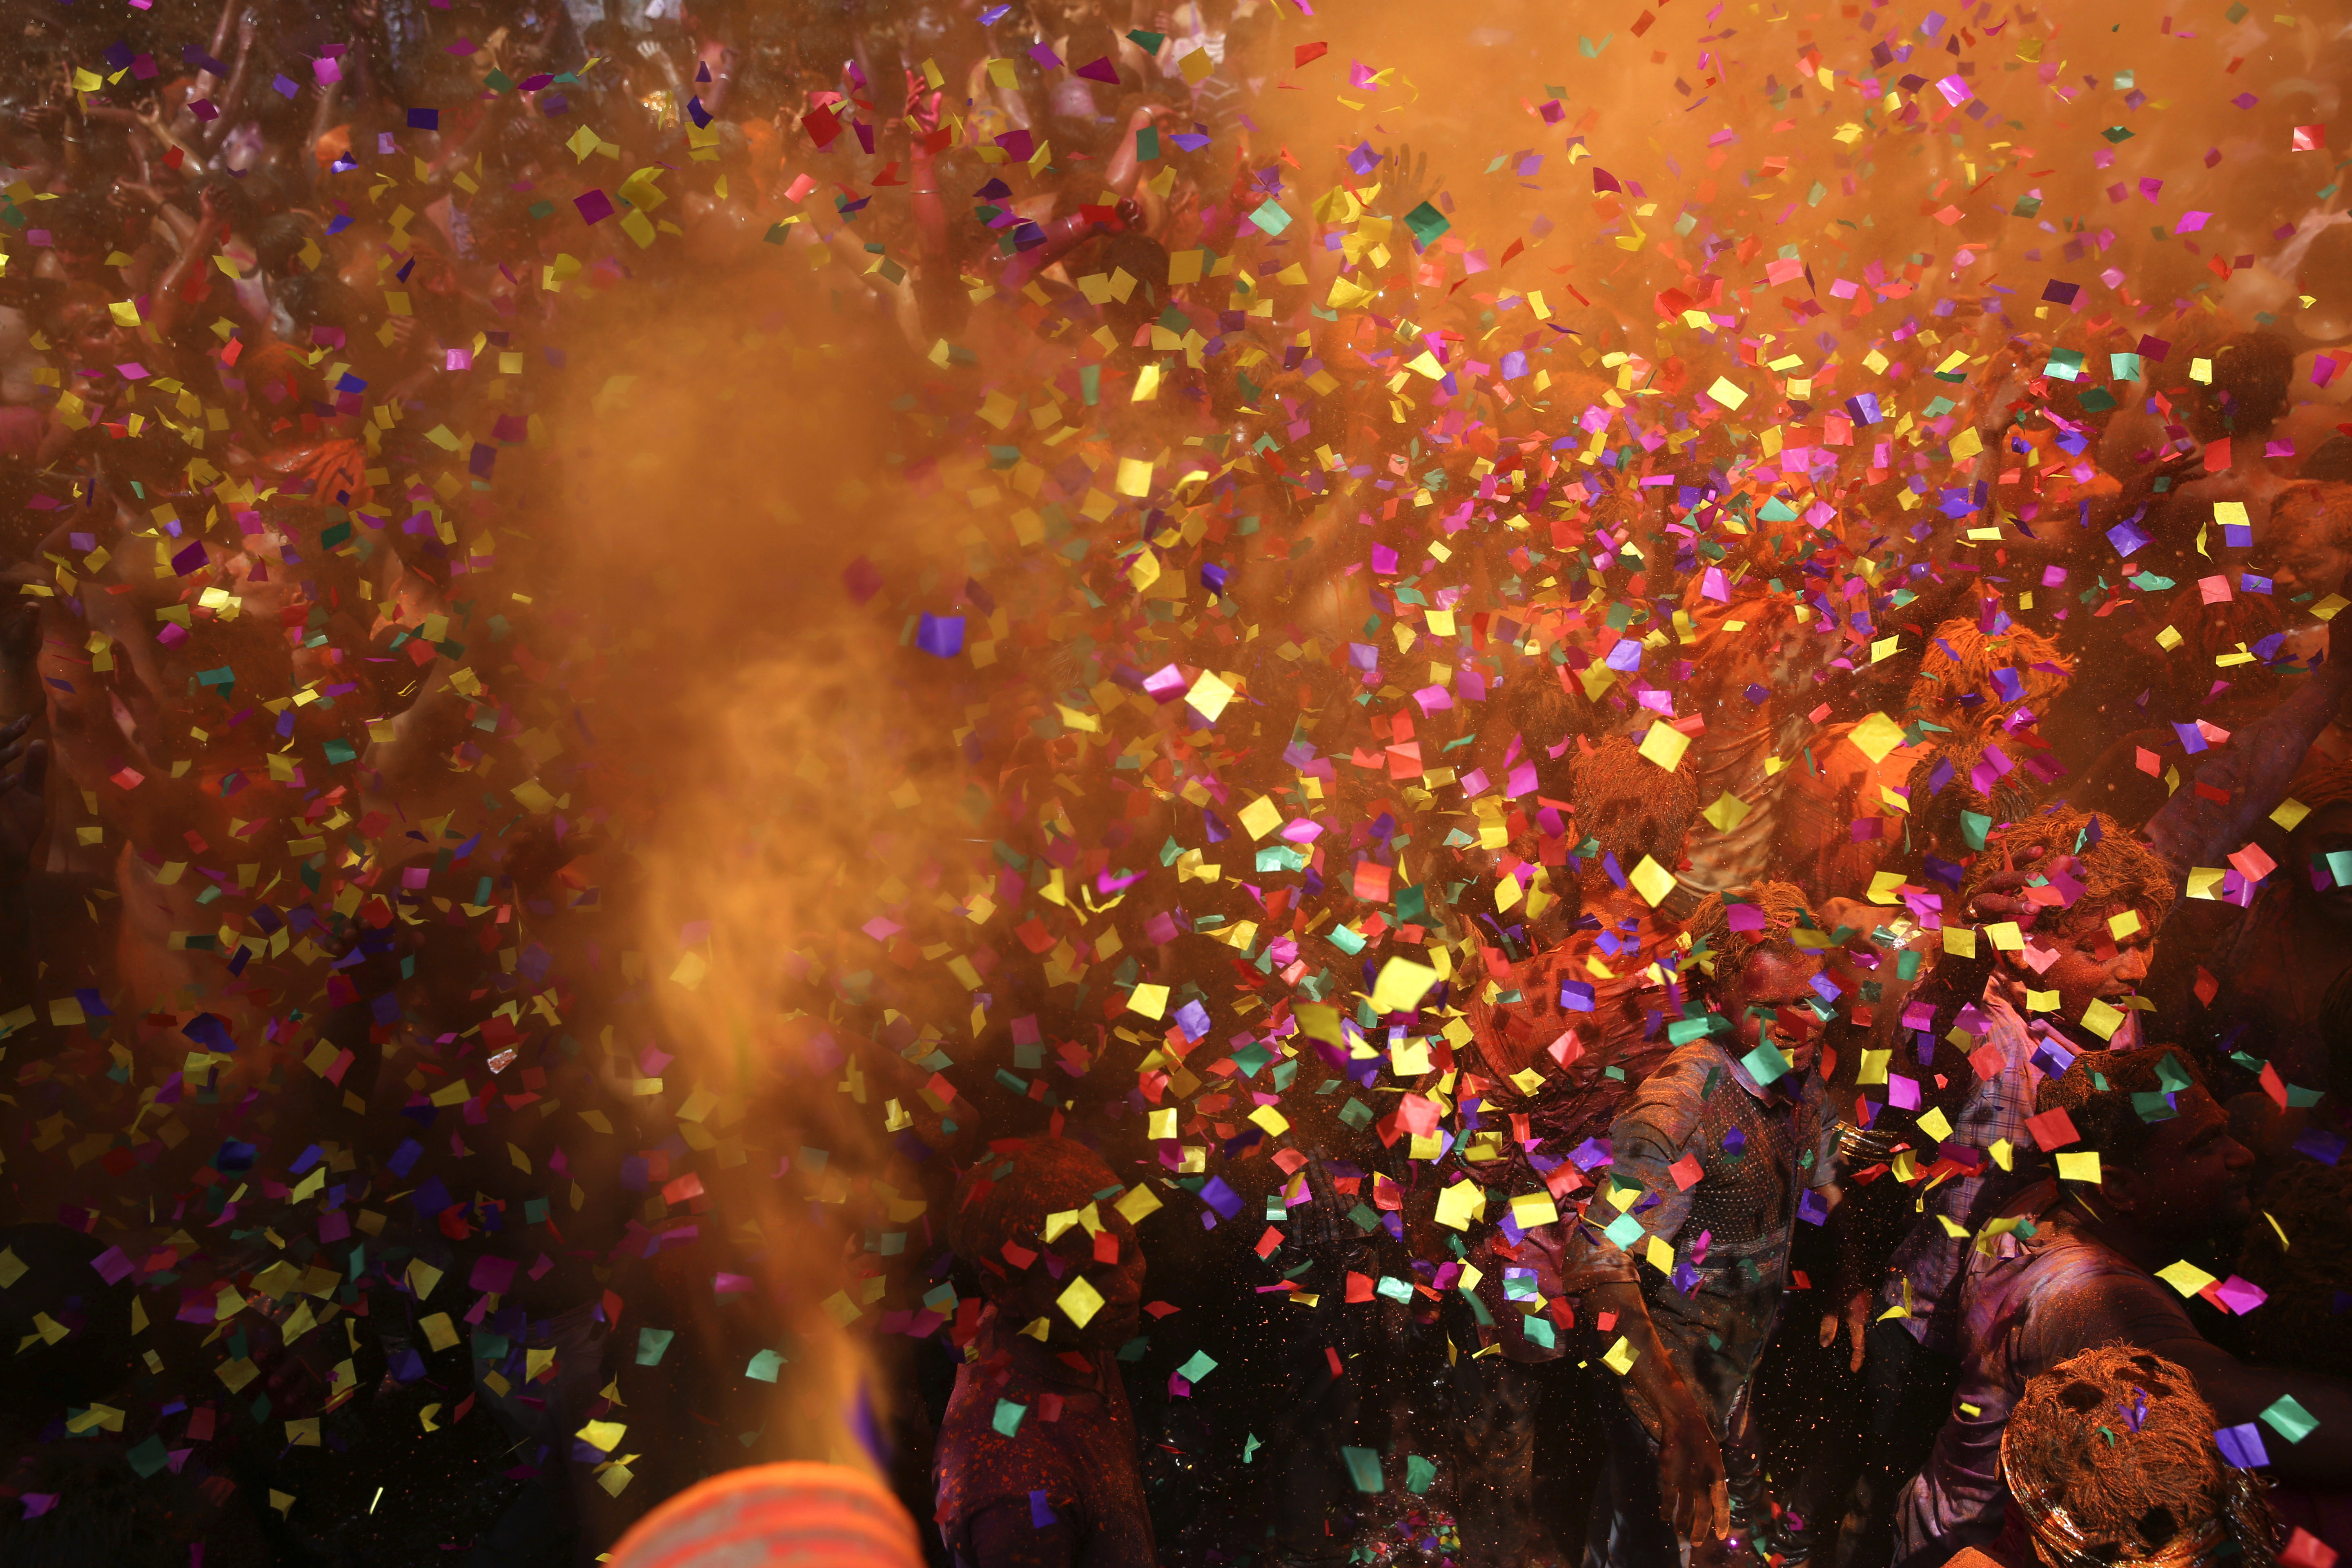 Indian revelers dance as colored powder and confetti are showered on them during celebrations to mark Holi, the Hindu festival of colors, in Prayagraj, India, Friday, March 22, 2019. Indians on Thursday celebrated Holi, the riotous annual celebration of color, that marks the end of winter and the arrival of spring. People armed with water balloons, colored water and powder in multiple hues played Holi by smearing each other's faces with color. (AP Photo/ Rajesh Kumar Singh)